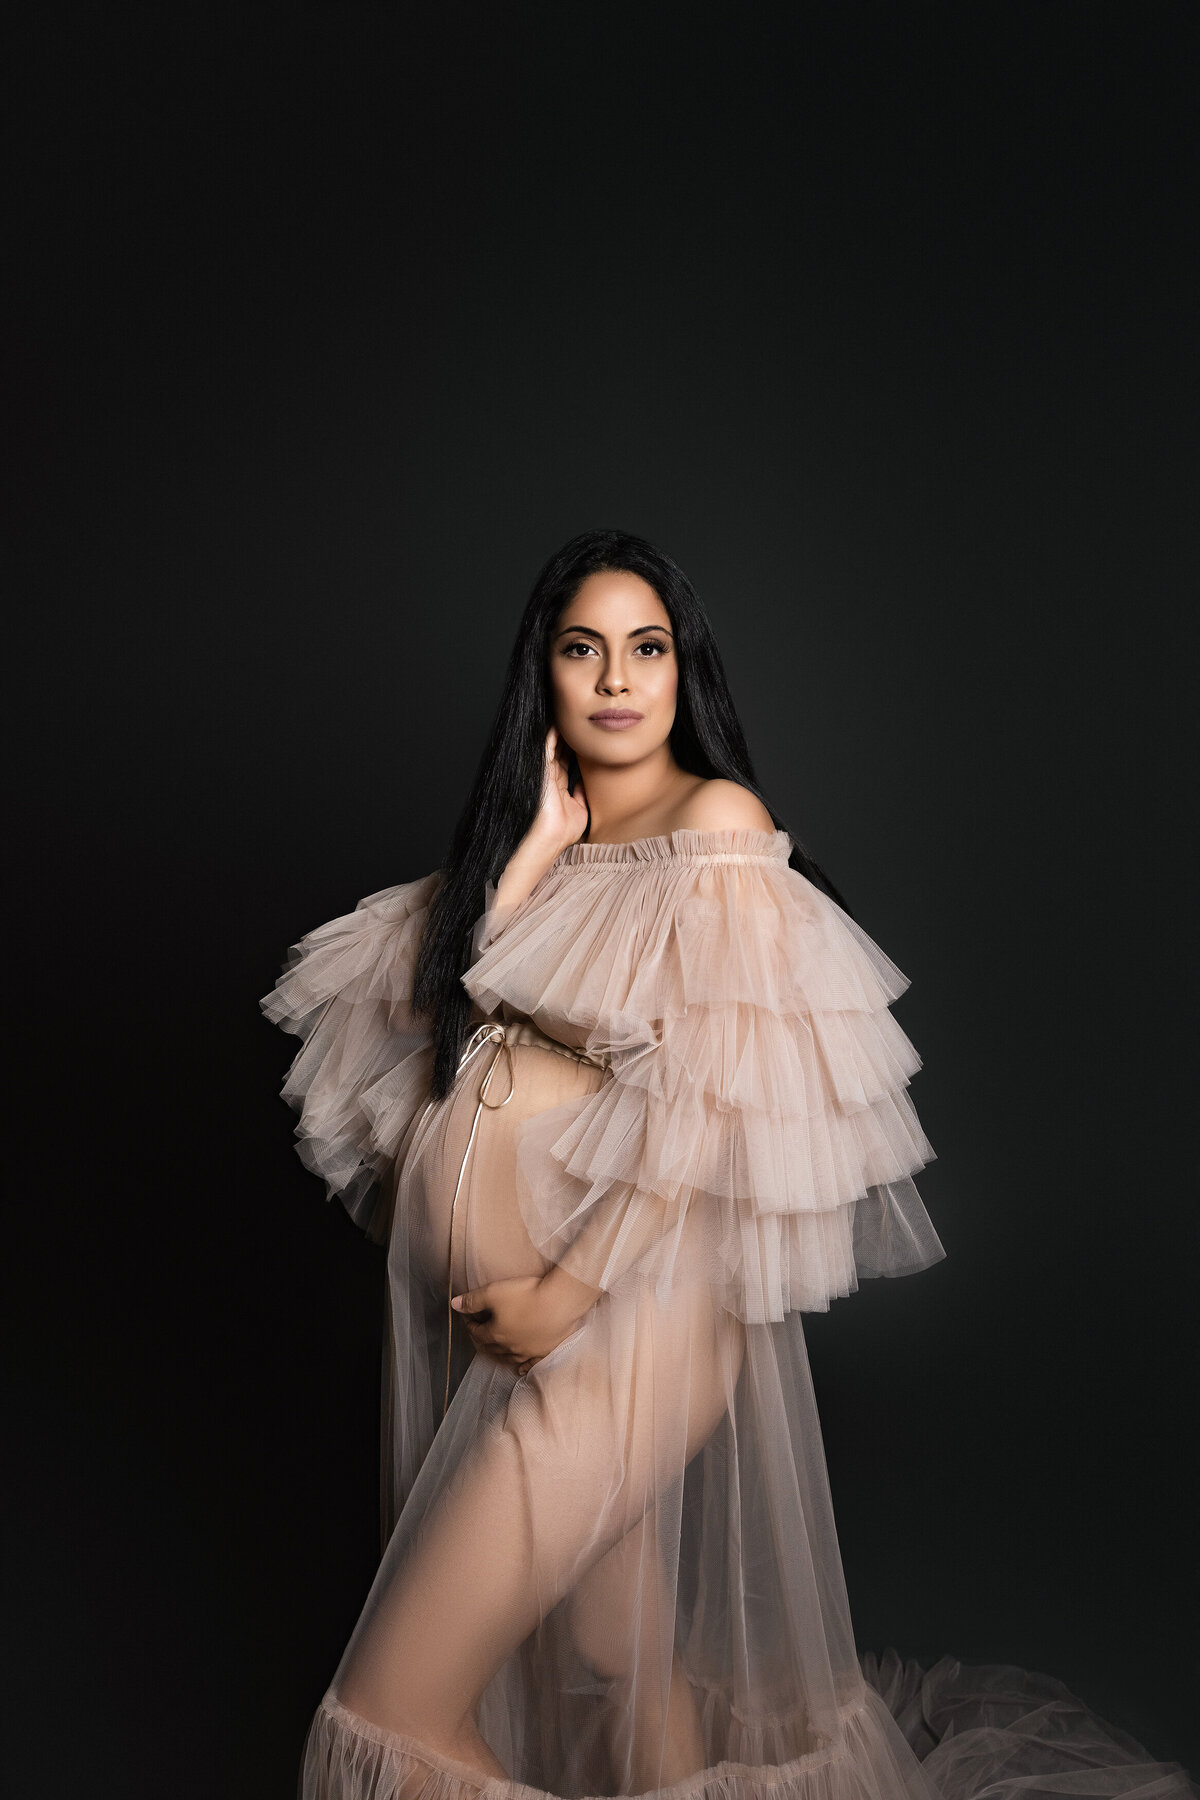 Maternity photos captured by top London, ON Maternity Photographer Amy Perrin-Ogg. Woman in tulle gown is standing side profile to the camera looking over her shoulder and holding her bump.